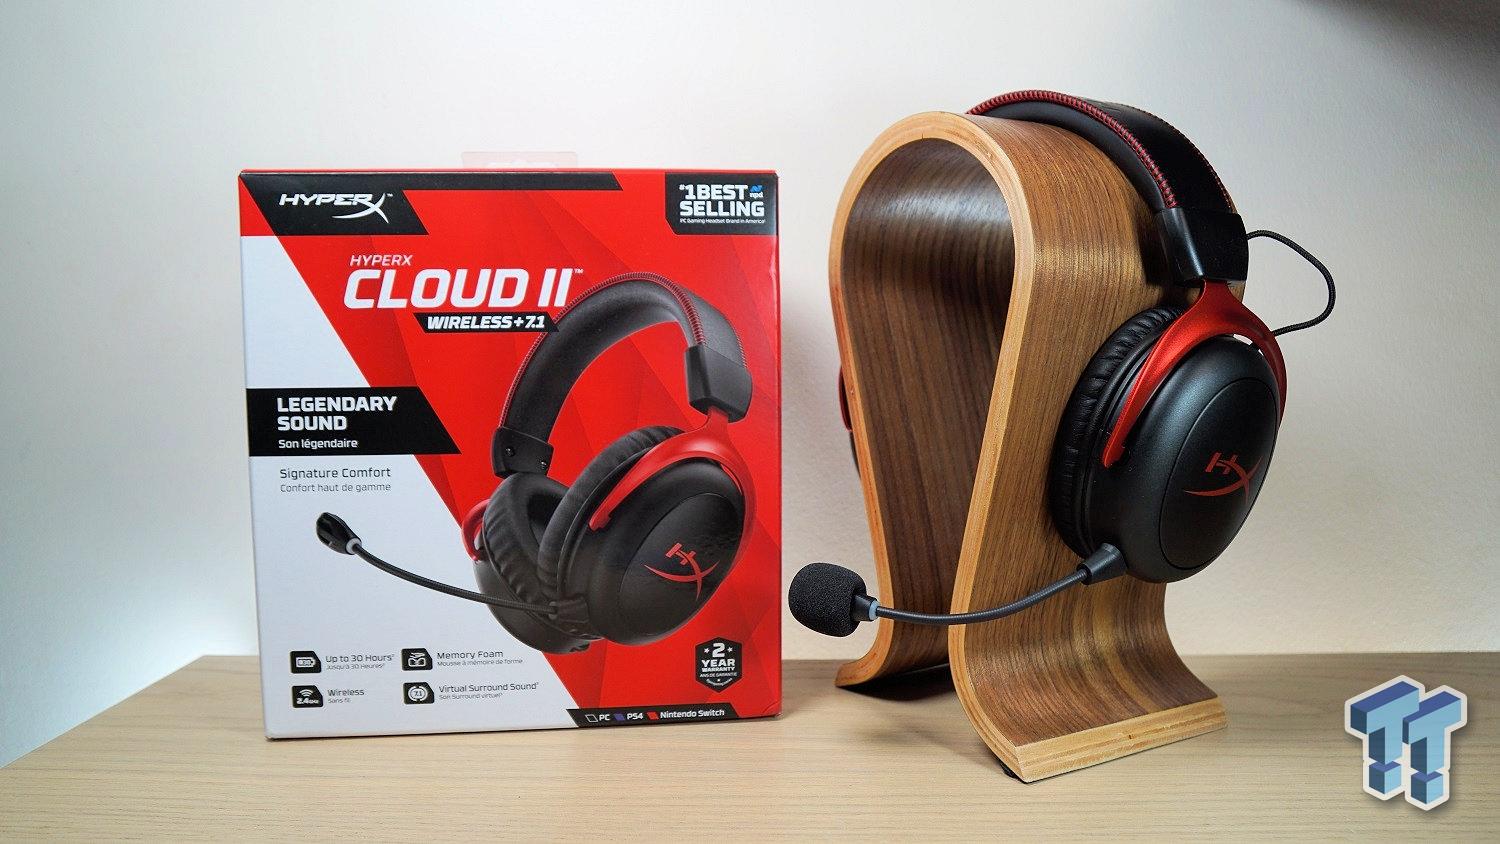 HyperX Cloud 2 wireless gaming headset is comfy but basic for the bucks -  The Tech Edvocate